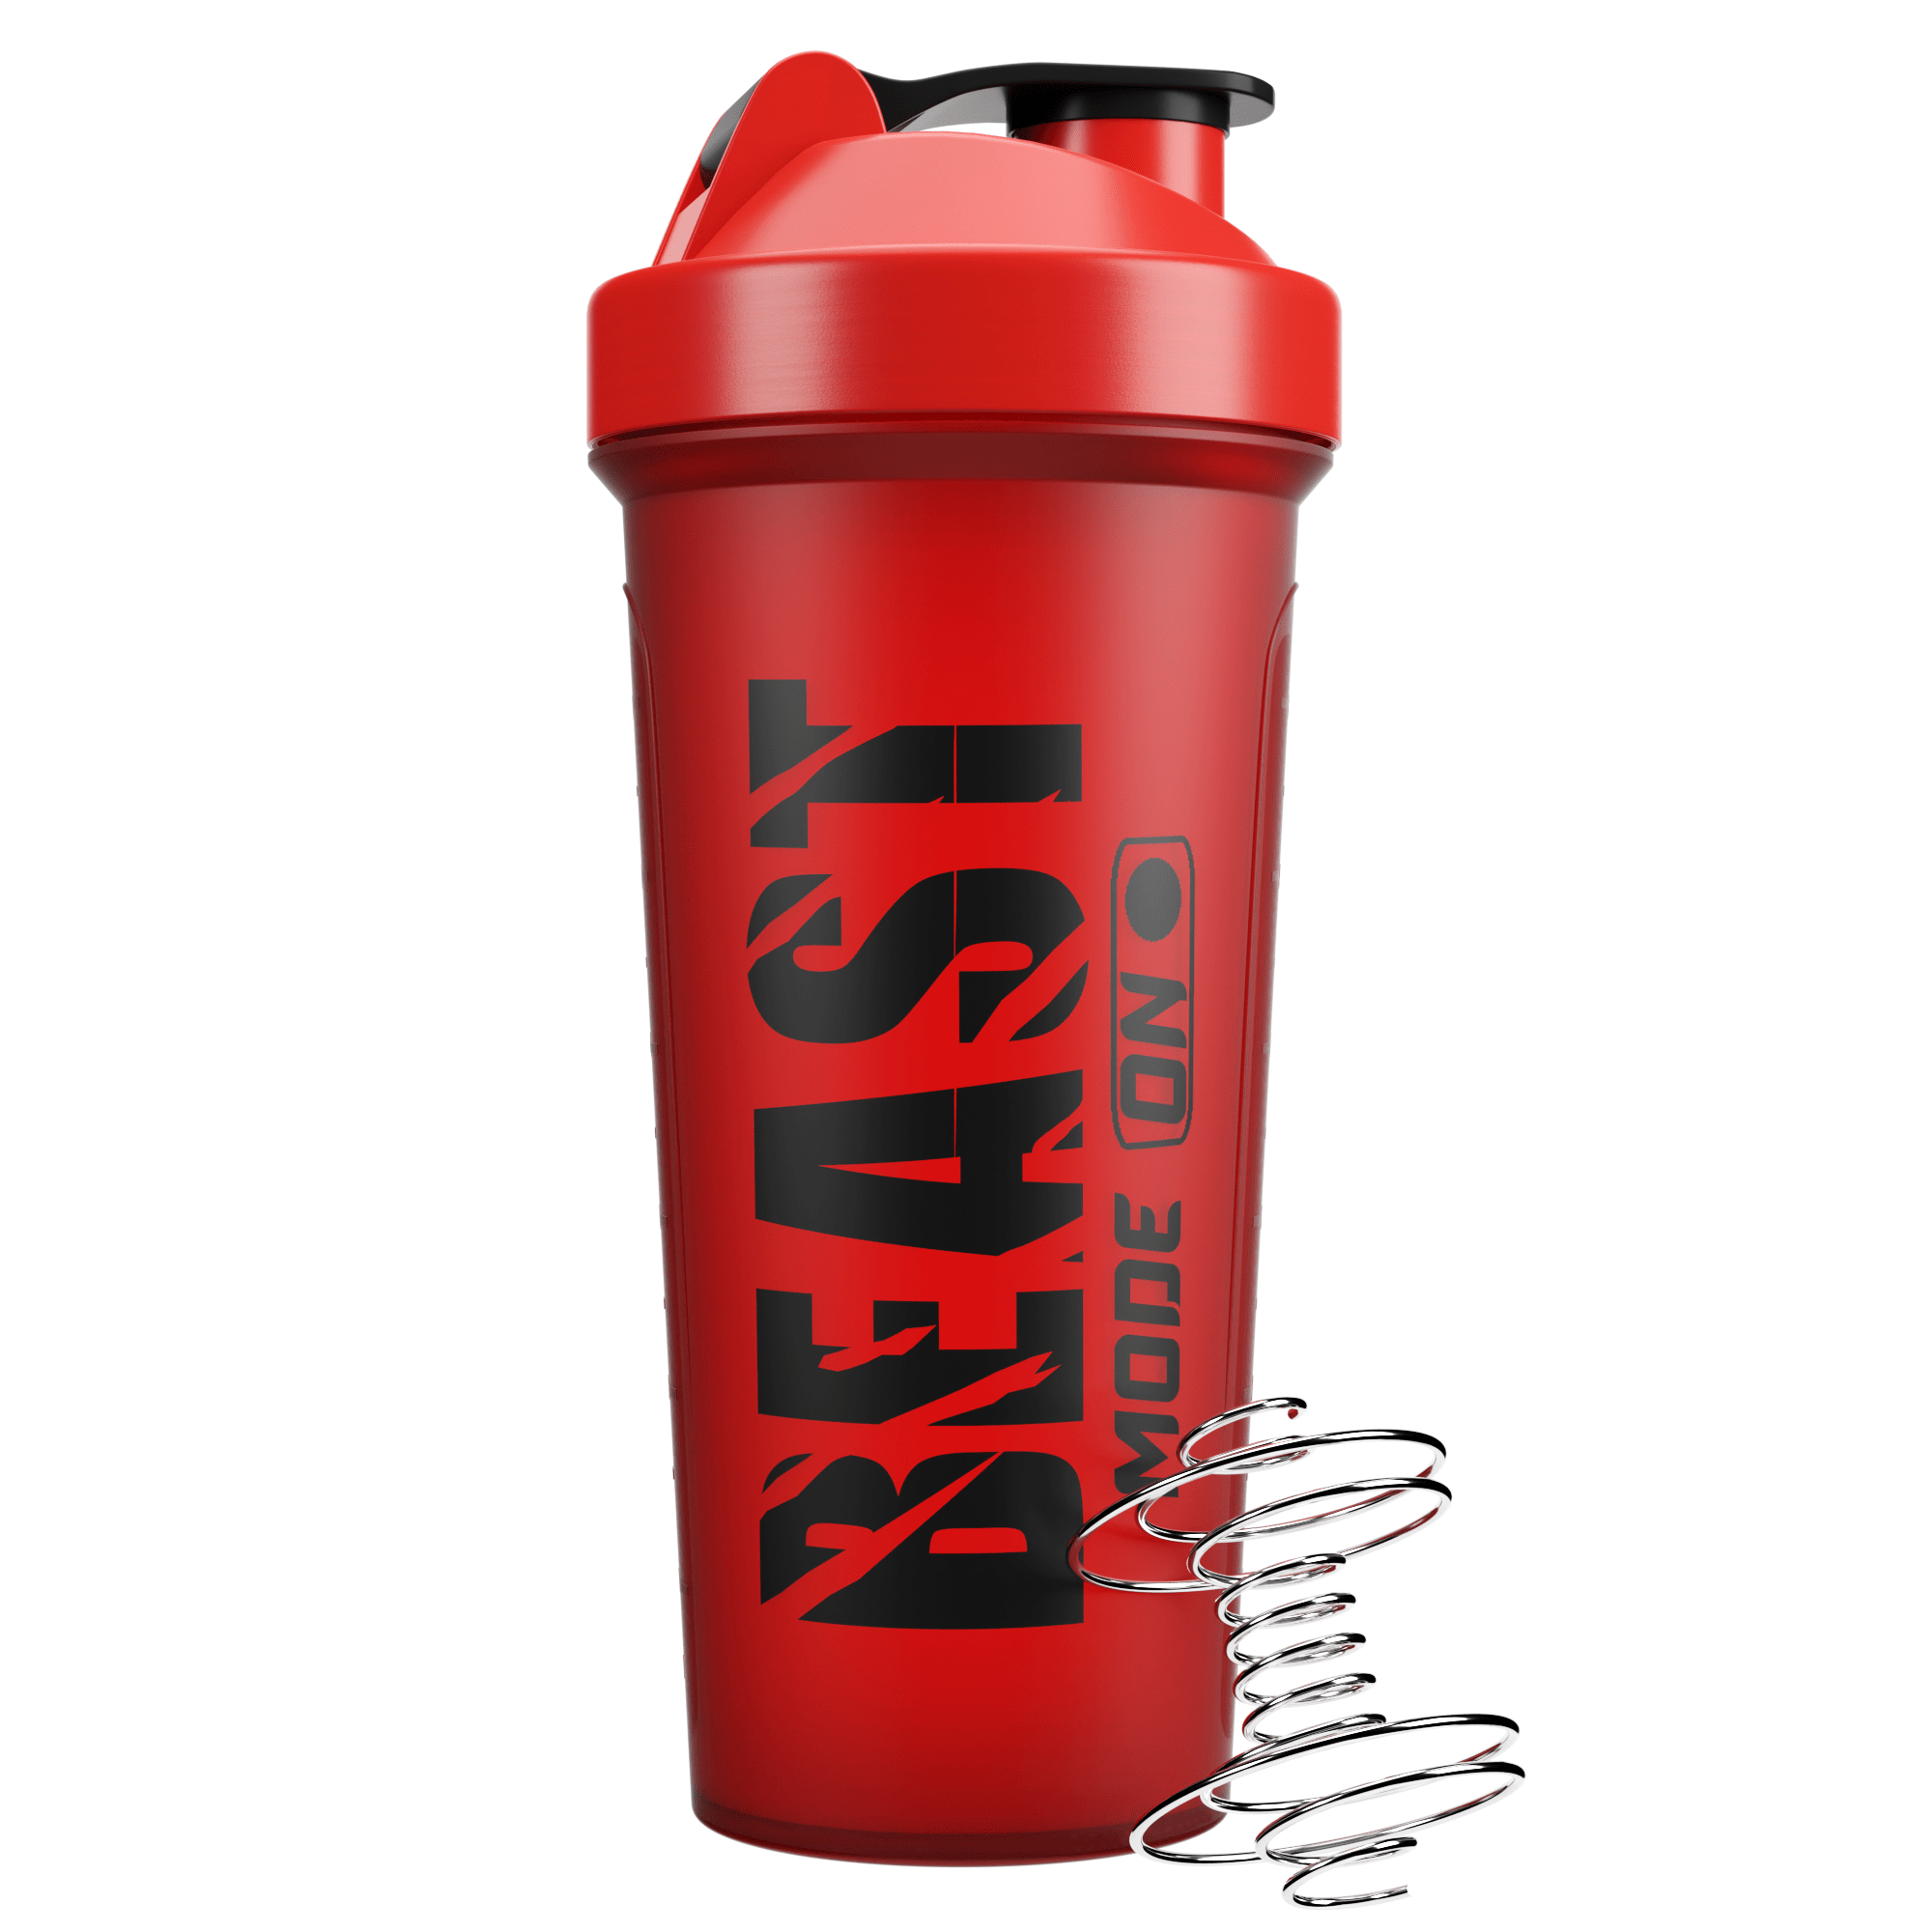 All Reusable Water Bottles & Shakers